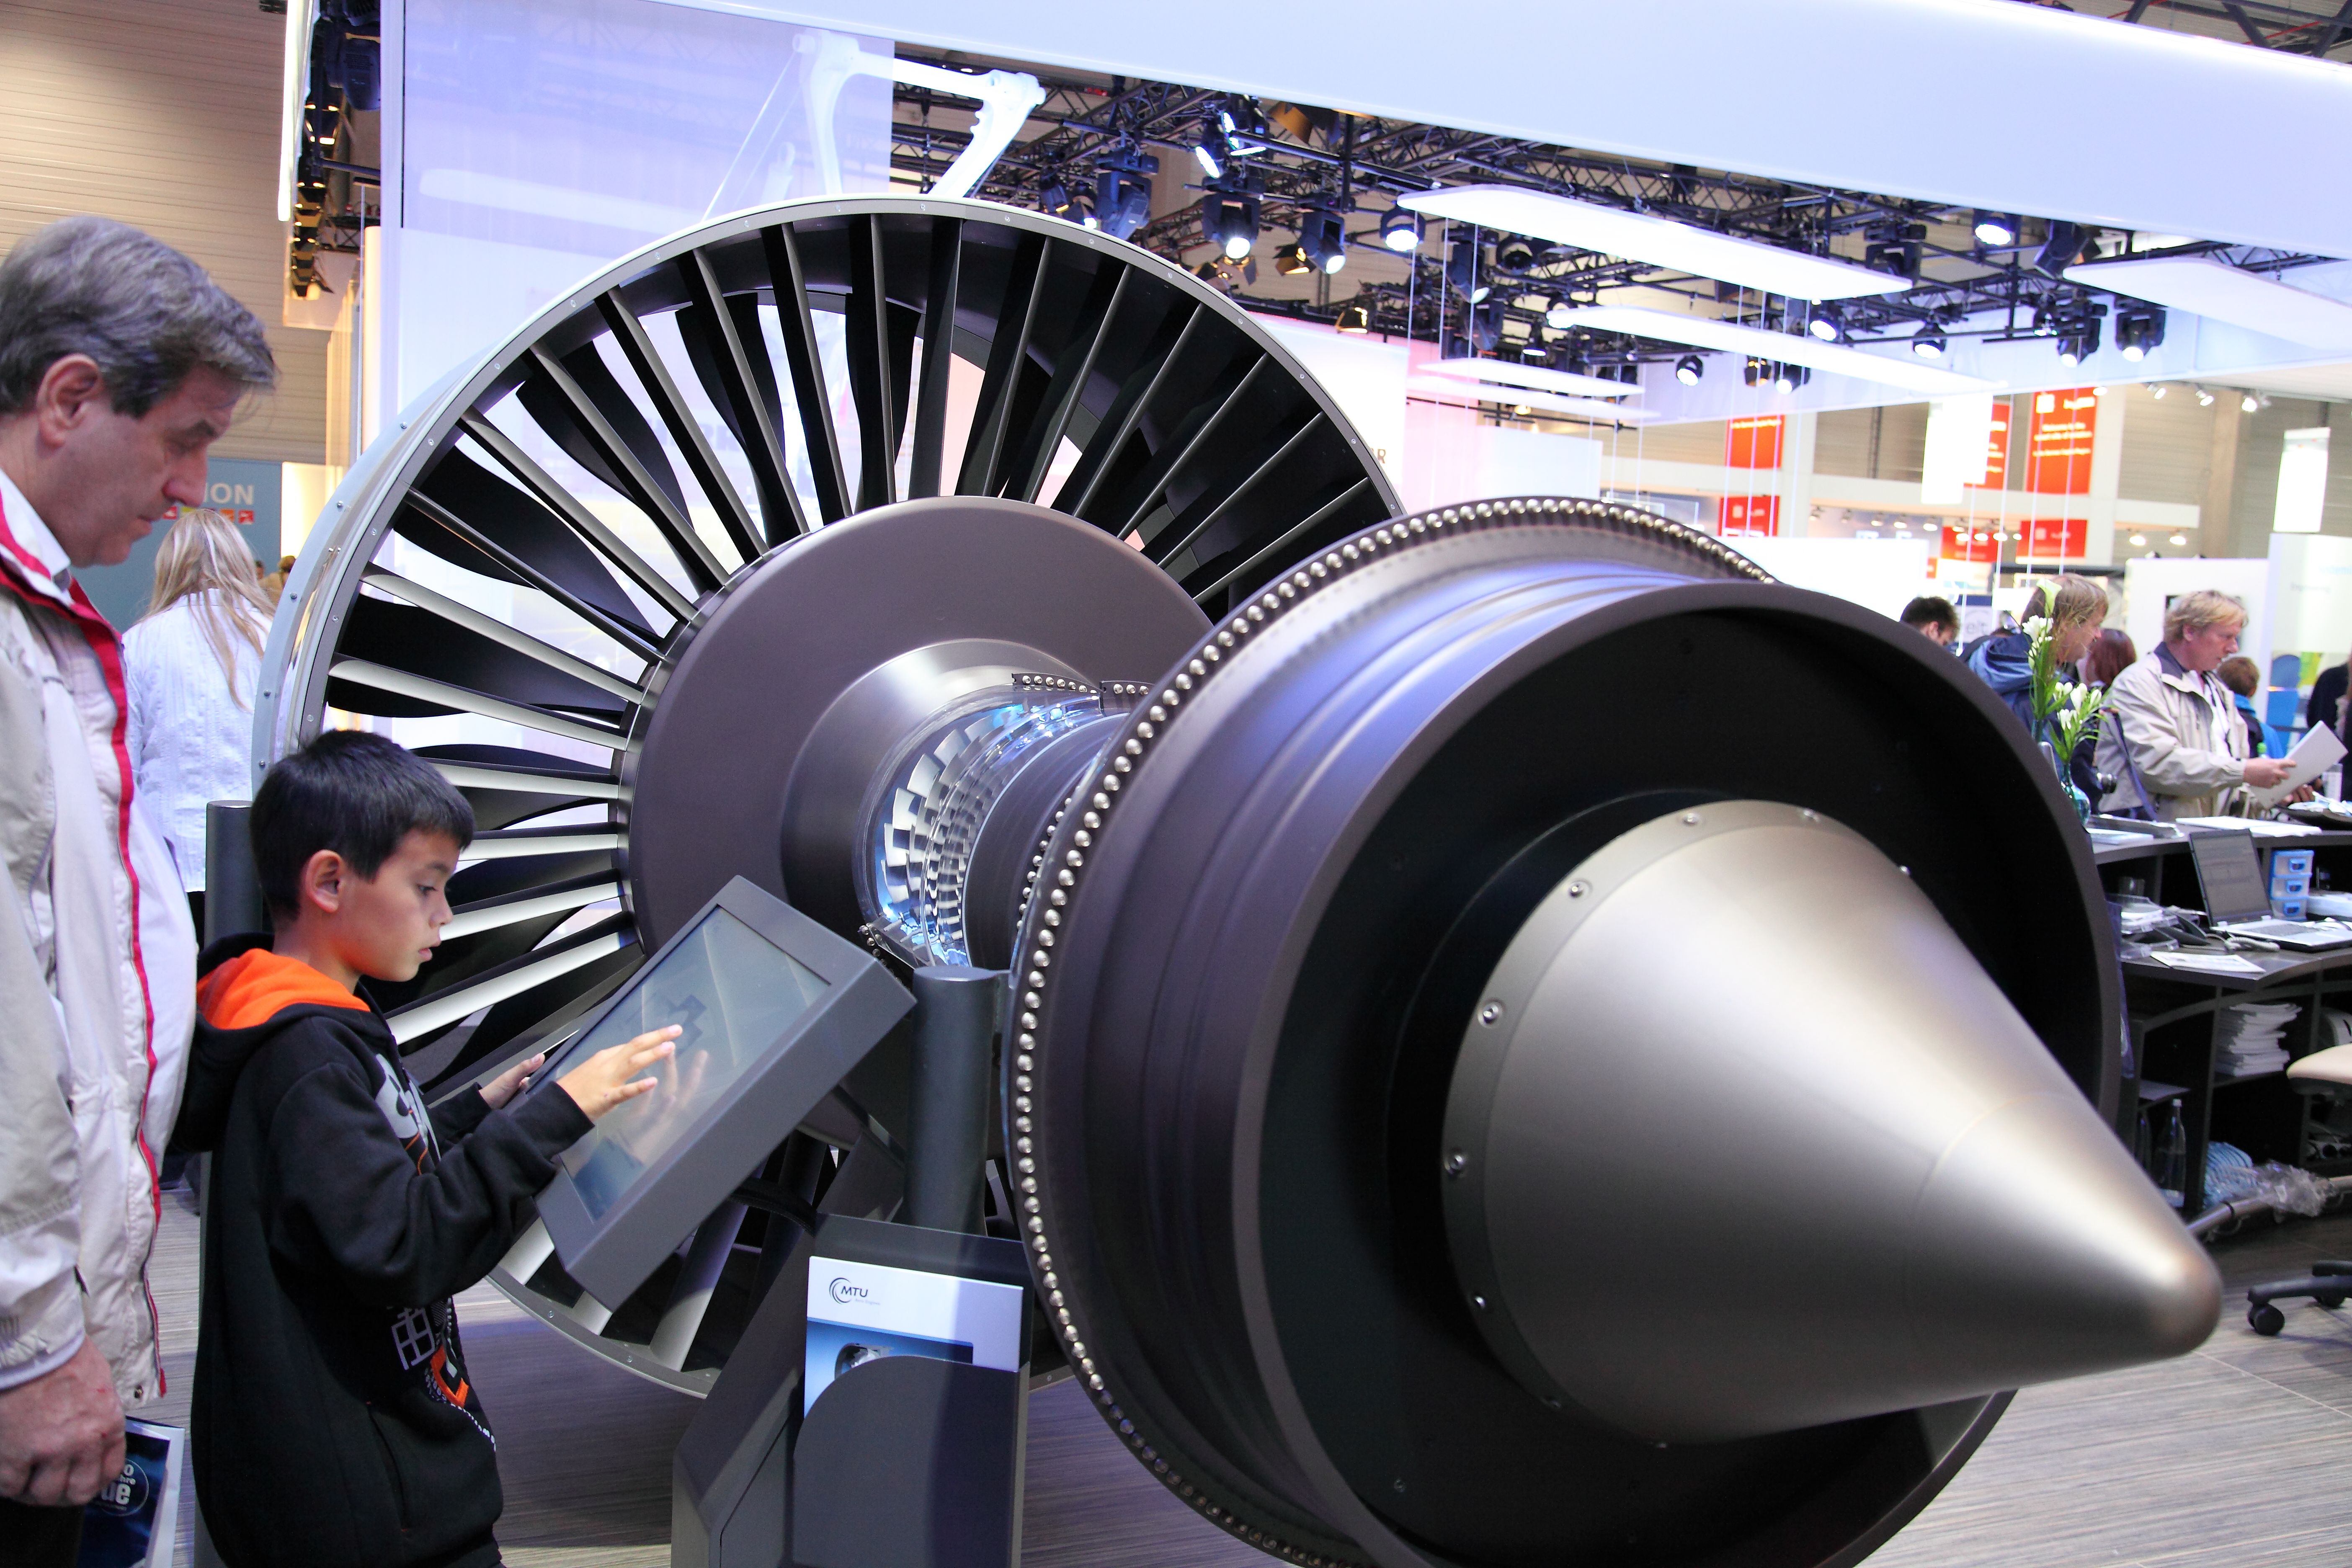 ILA Berlin Air Show 2012; Geared Turbo Fan: The Technology of the PurePower; PW1000G Engine